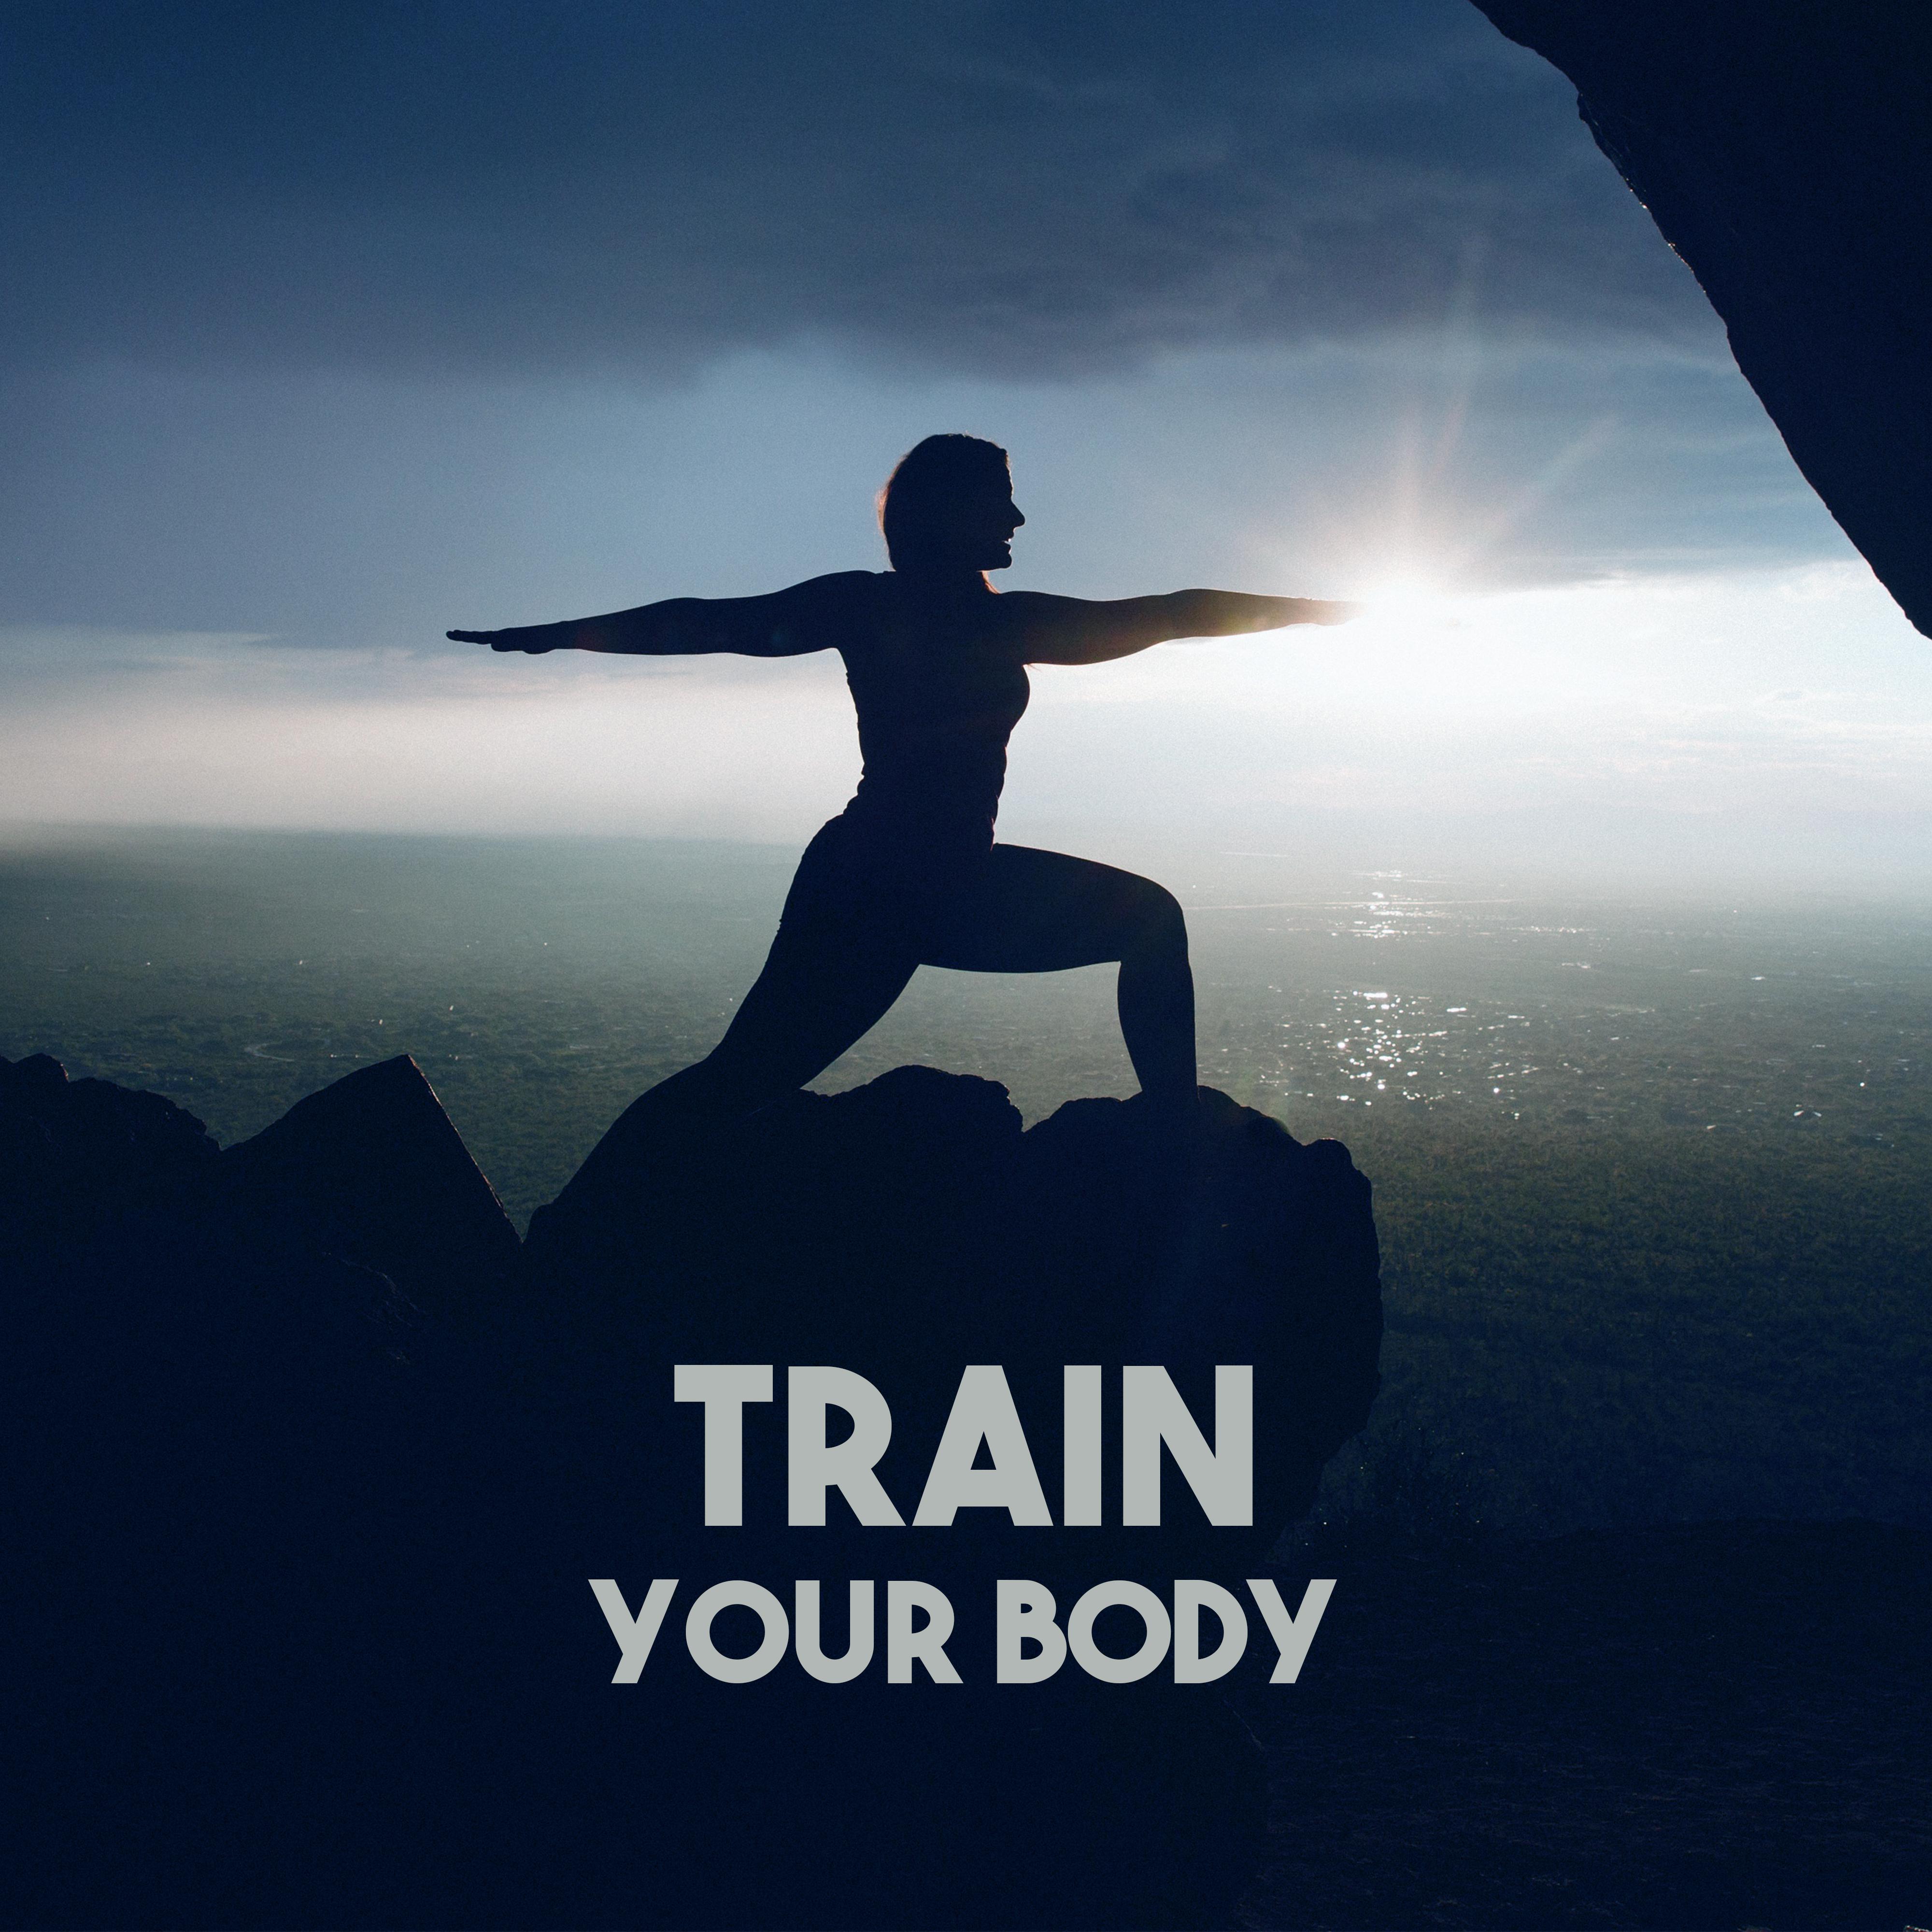 Train Your Body  Meditation Music, Deep Focus, Better Harmony, Calmness, Soothing Ocean, Nature Sounds for Relaxation, Exercise Yoga